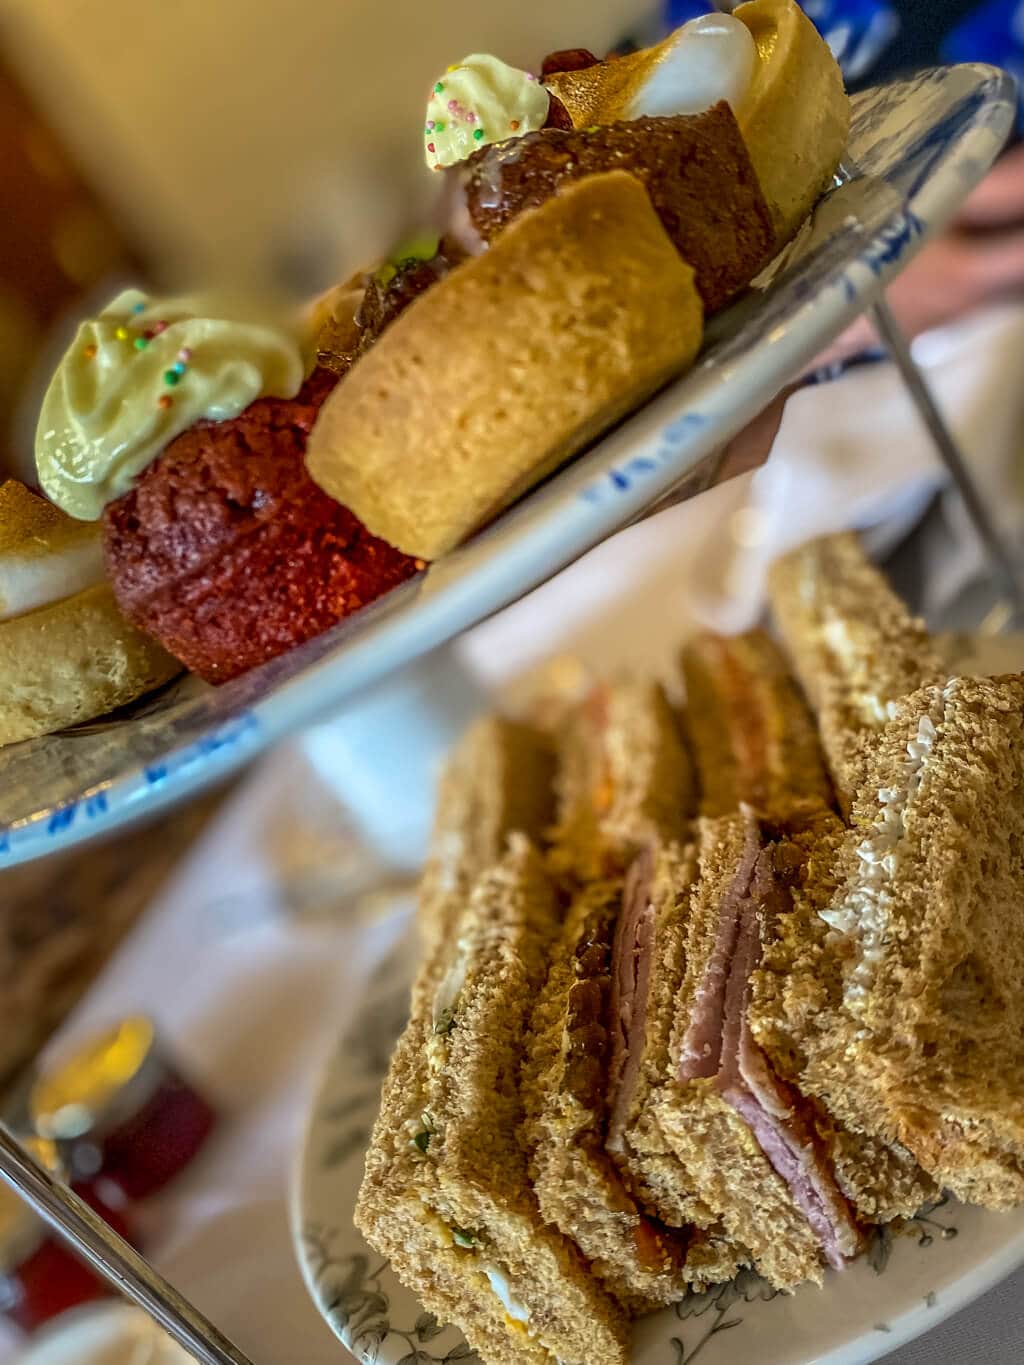 sandwiches and pastries from bletchley park afternoon tea